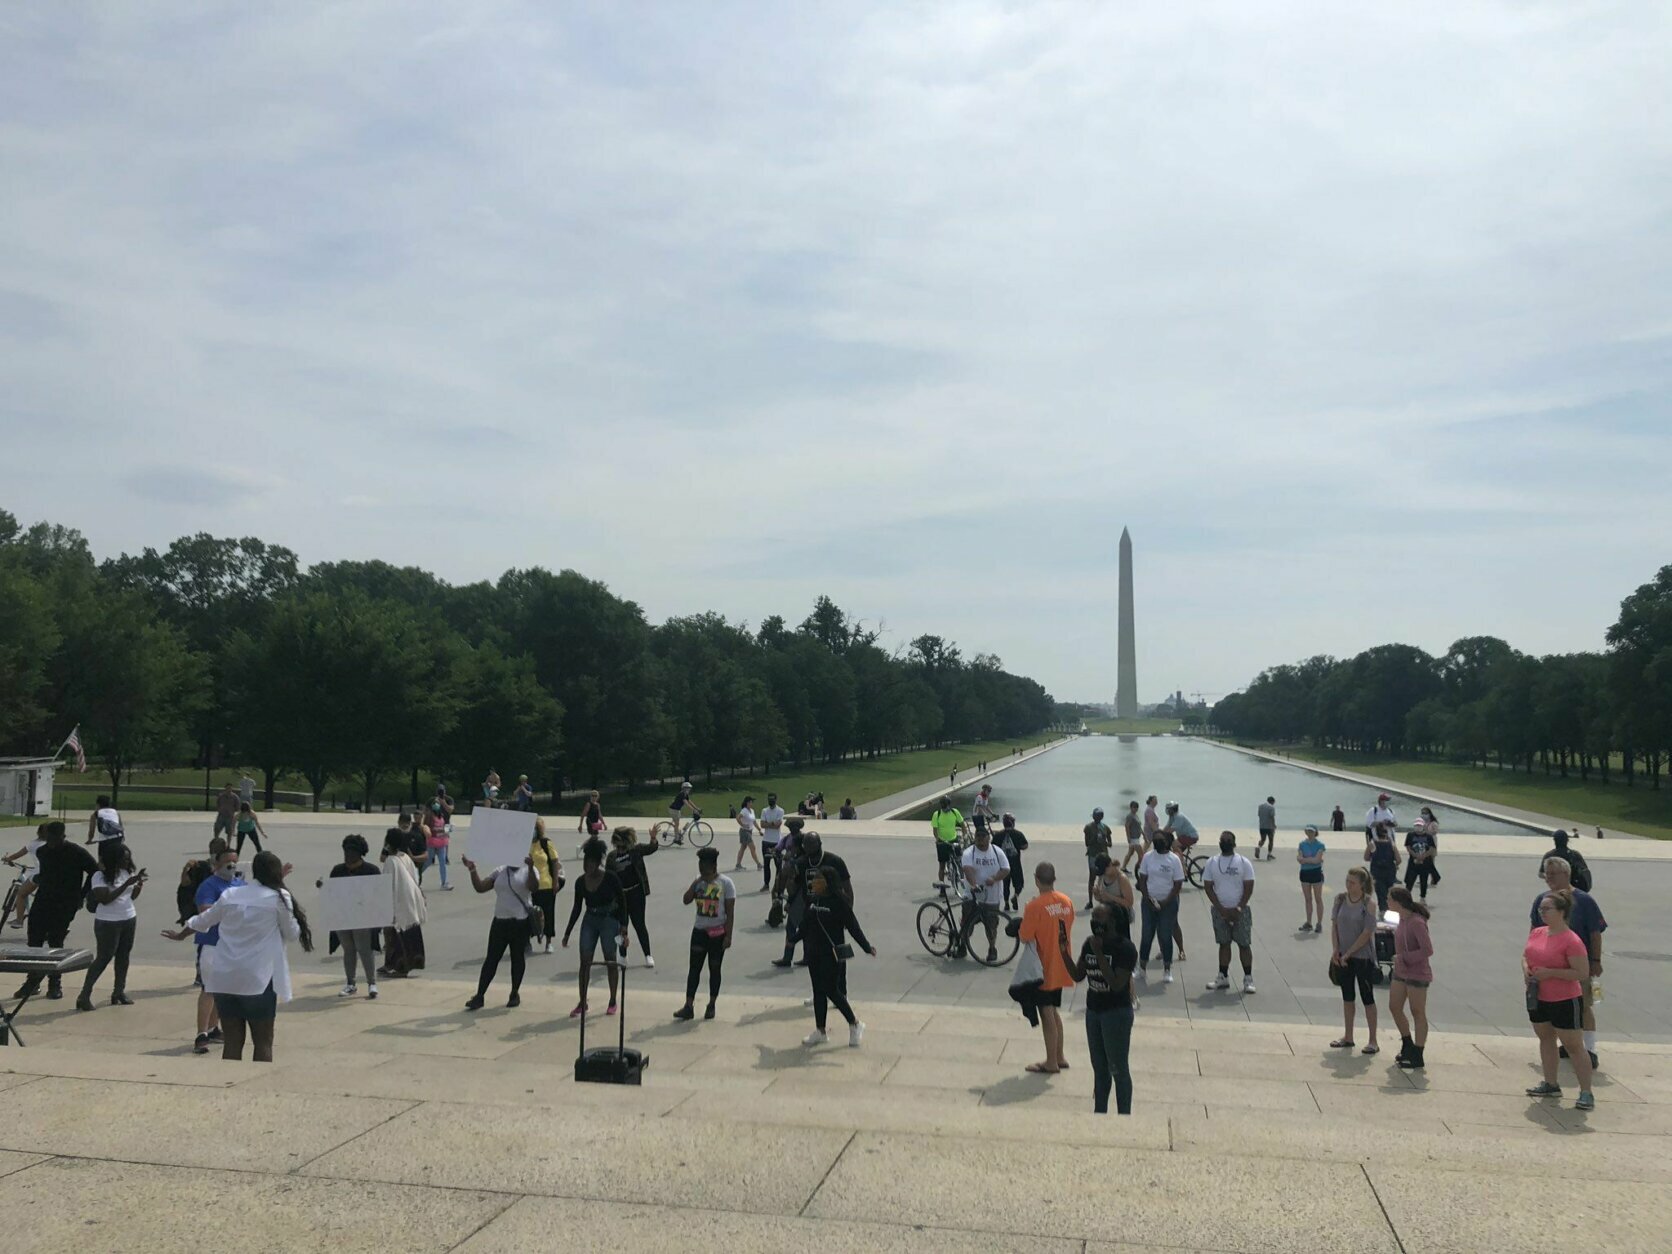 <p>Demonstrators start to gather in D.C. ahead of planned protests on Saturday.</p>
